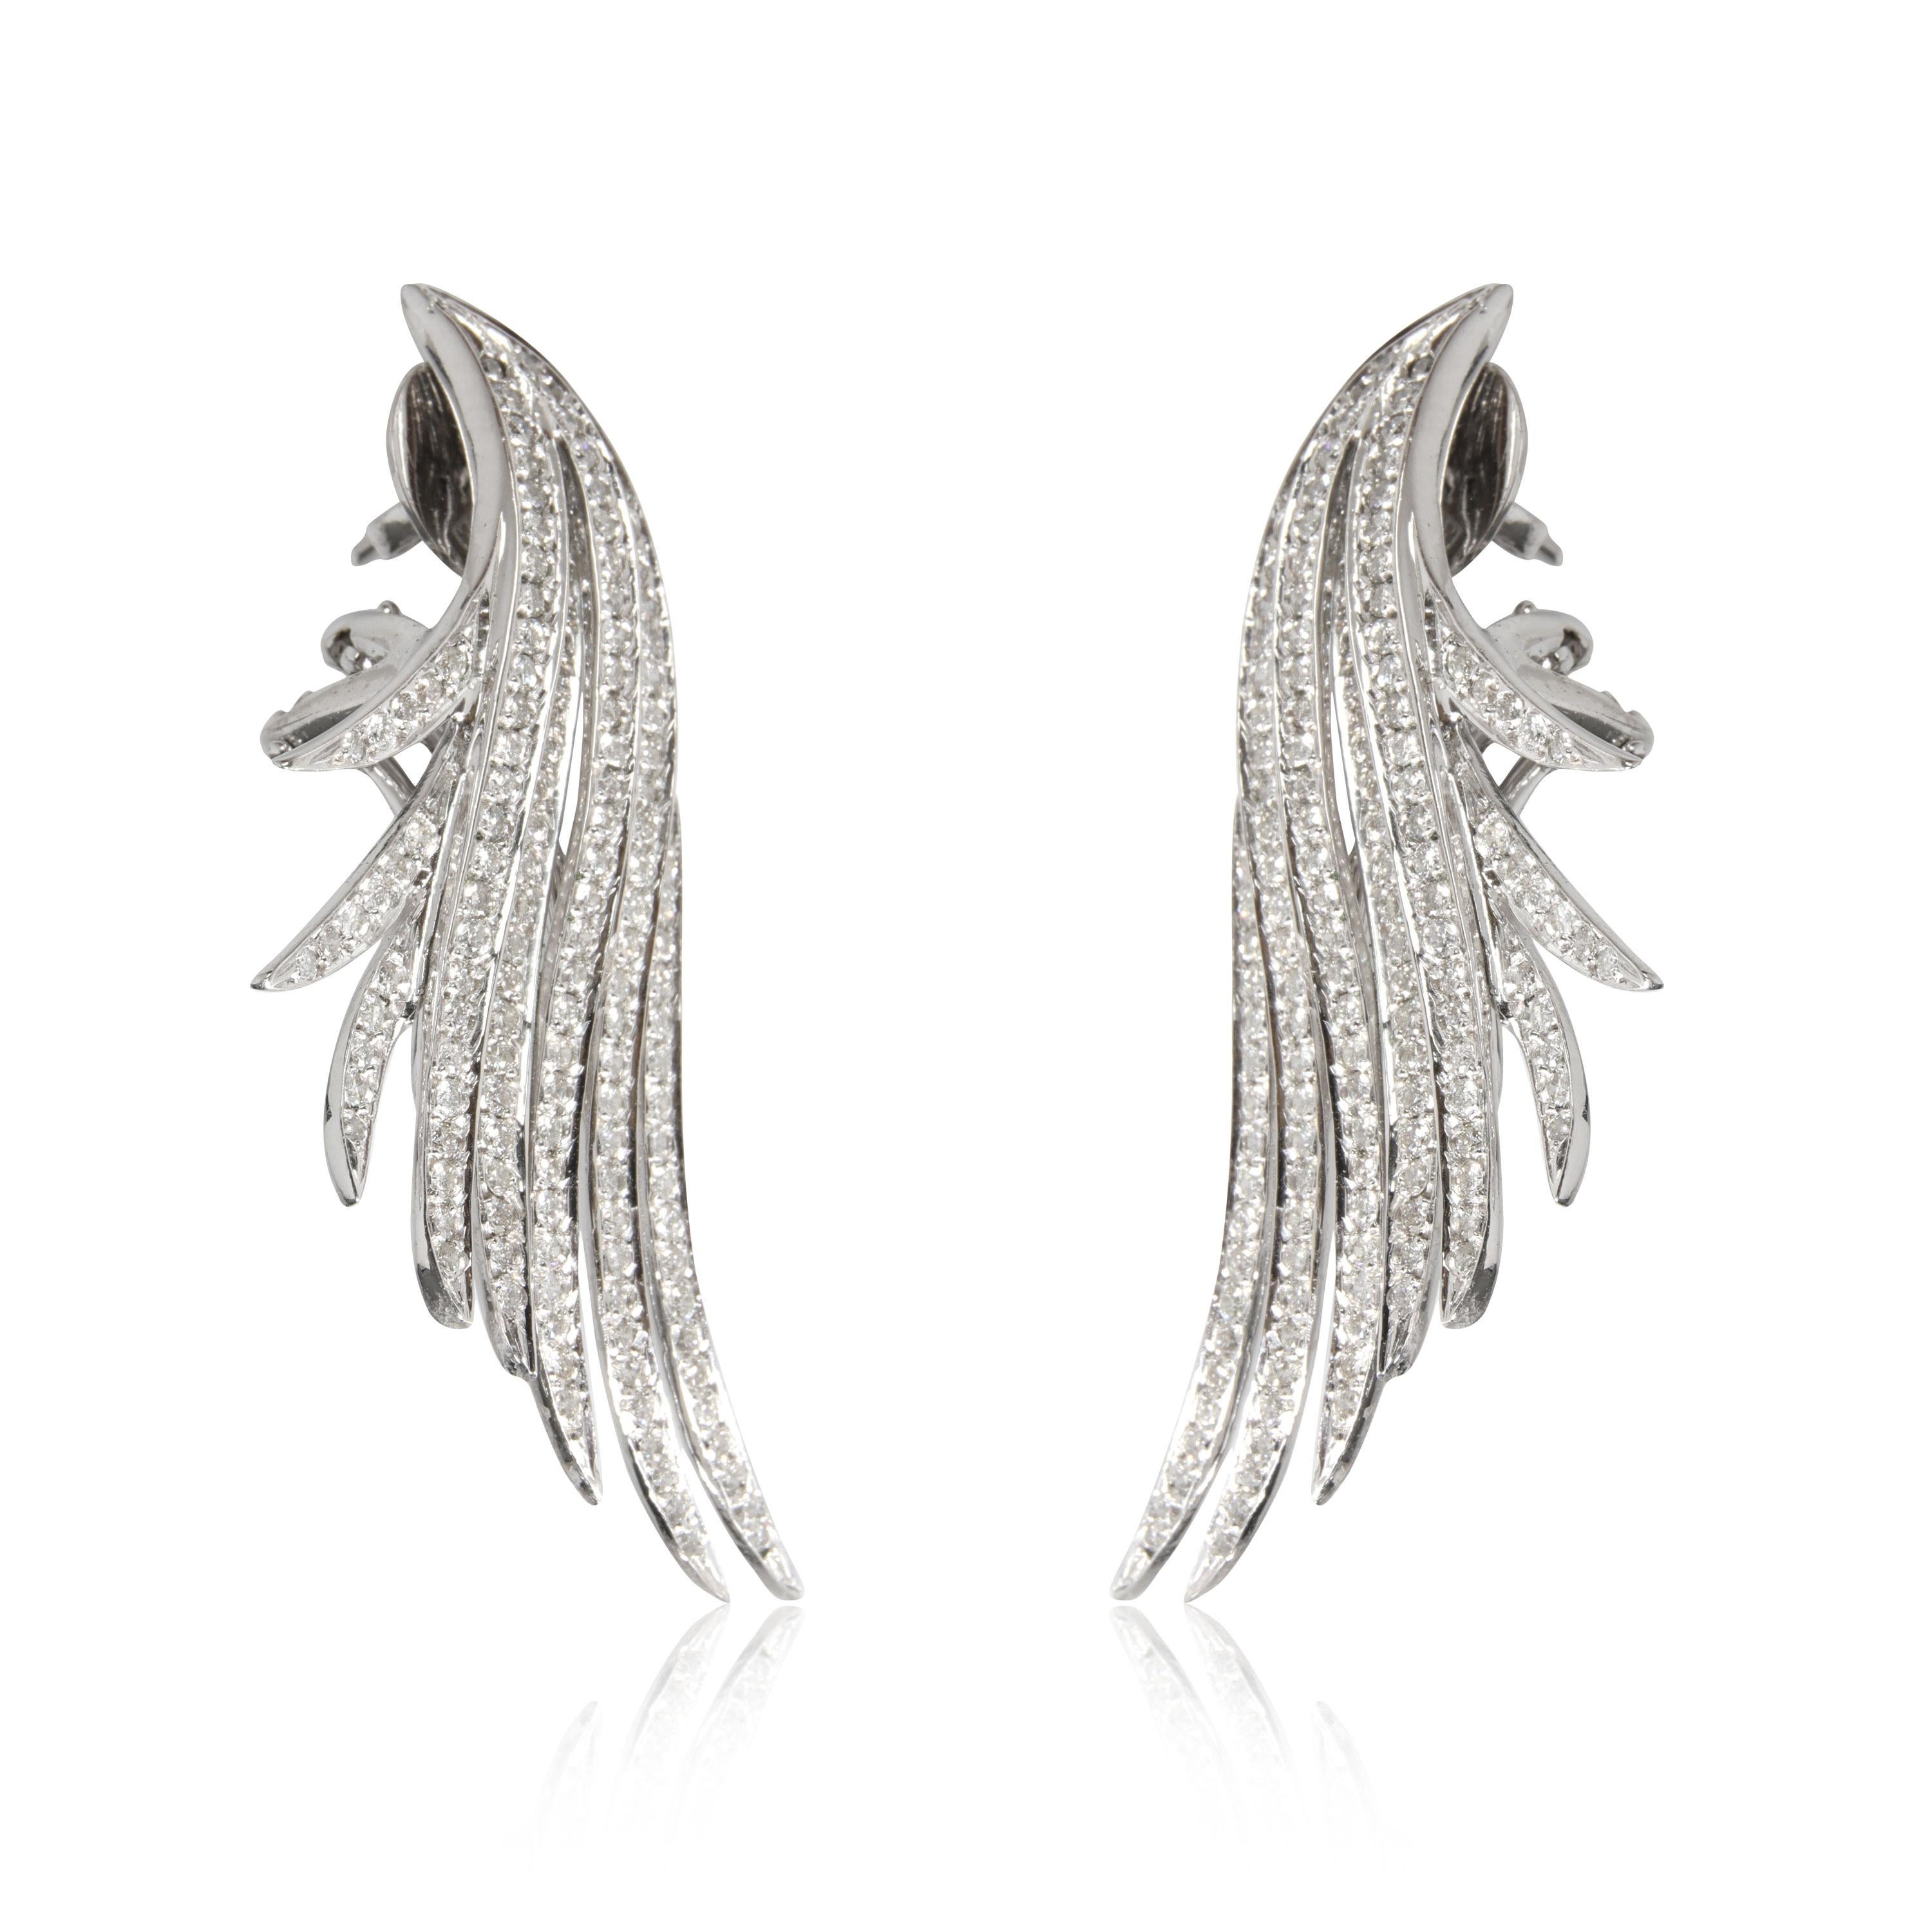 Ana Khouri Diamond Ear Climbers Earring in 18K White Gold 3.00 CTW

PRIMARY DETAILS
SKU: 112862
Listing Title: Ana Khouri Diamond Ear Climbers Earring in 18K White Gold 3.00 CTW
Condition Description: Retails for 18,000 USD. In excellent condition